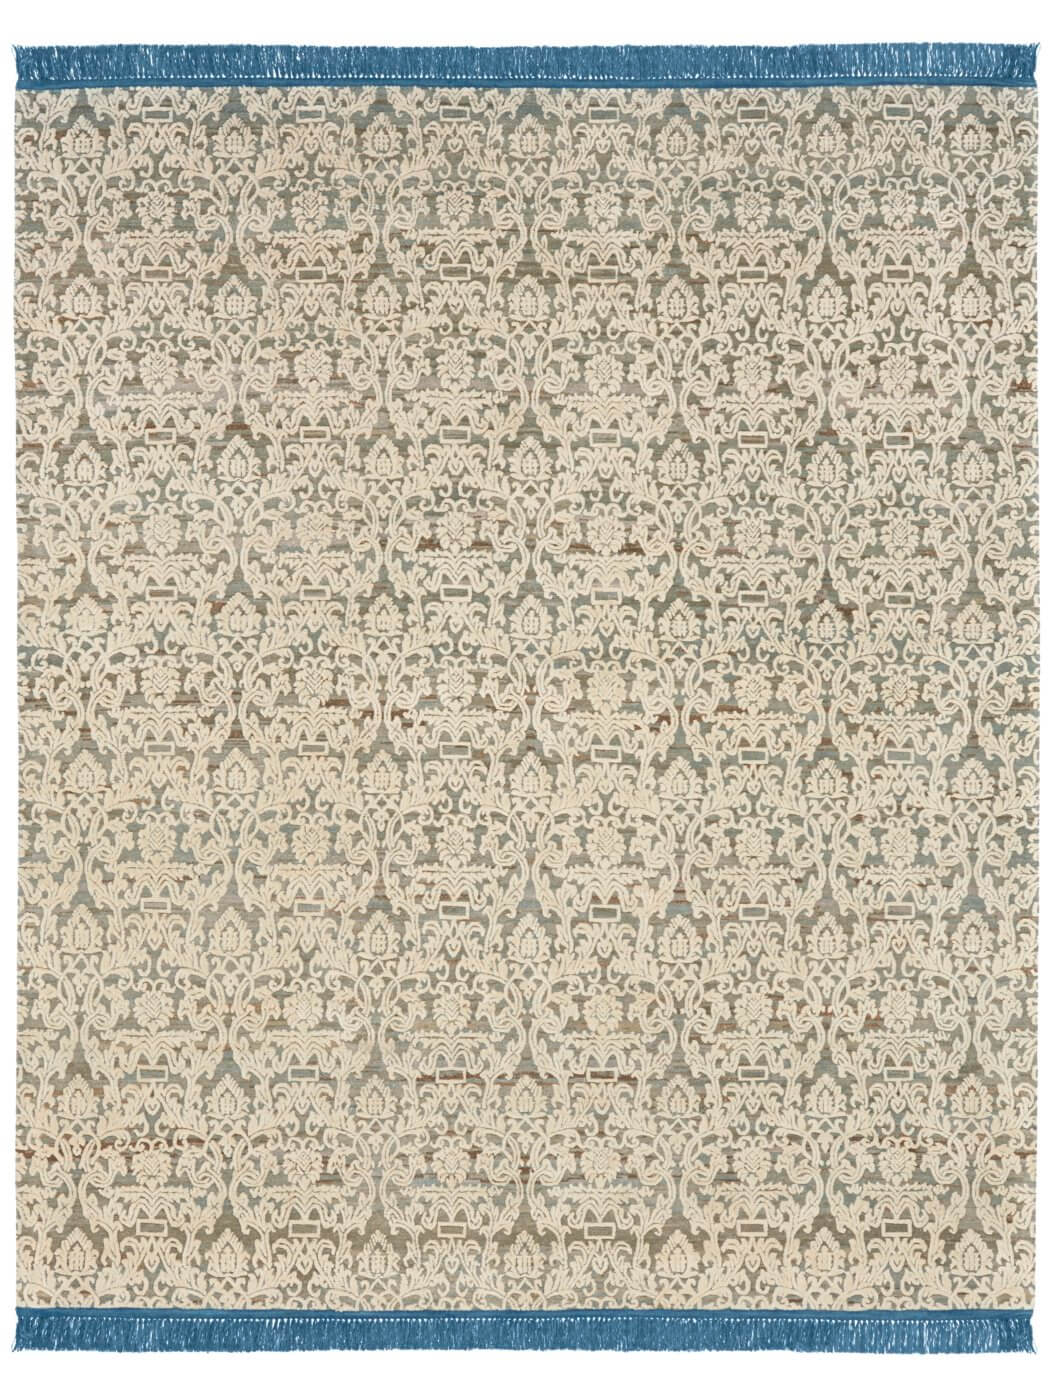 Hand-woven Vintage Style Luxury Rug ☞ Size: 200 x 300 cm